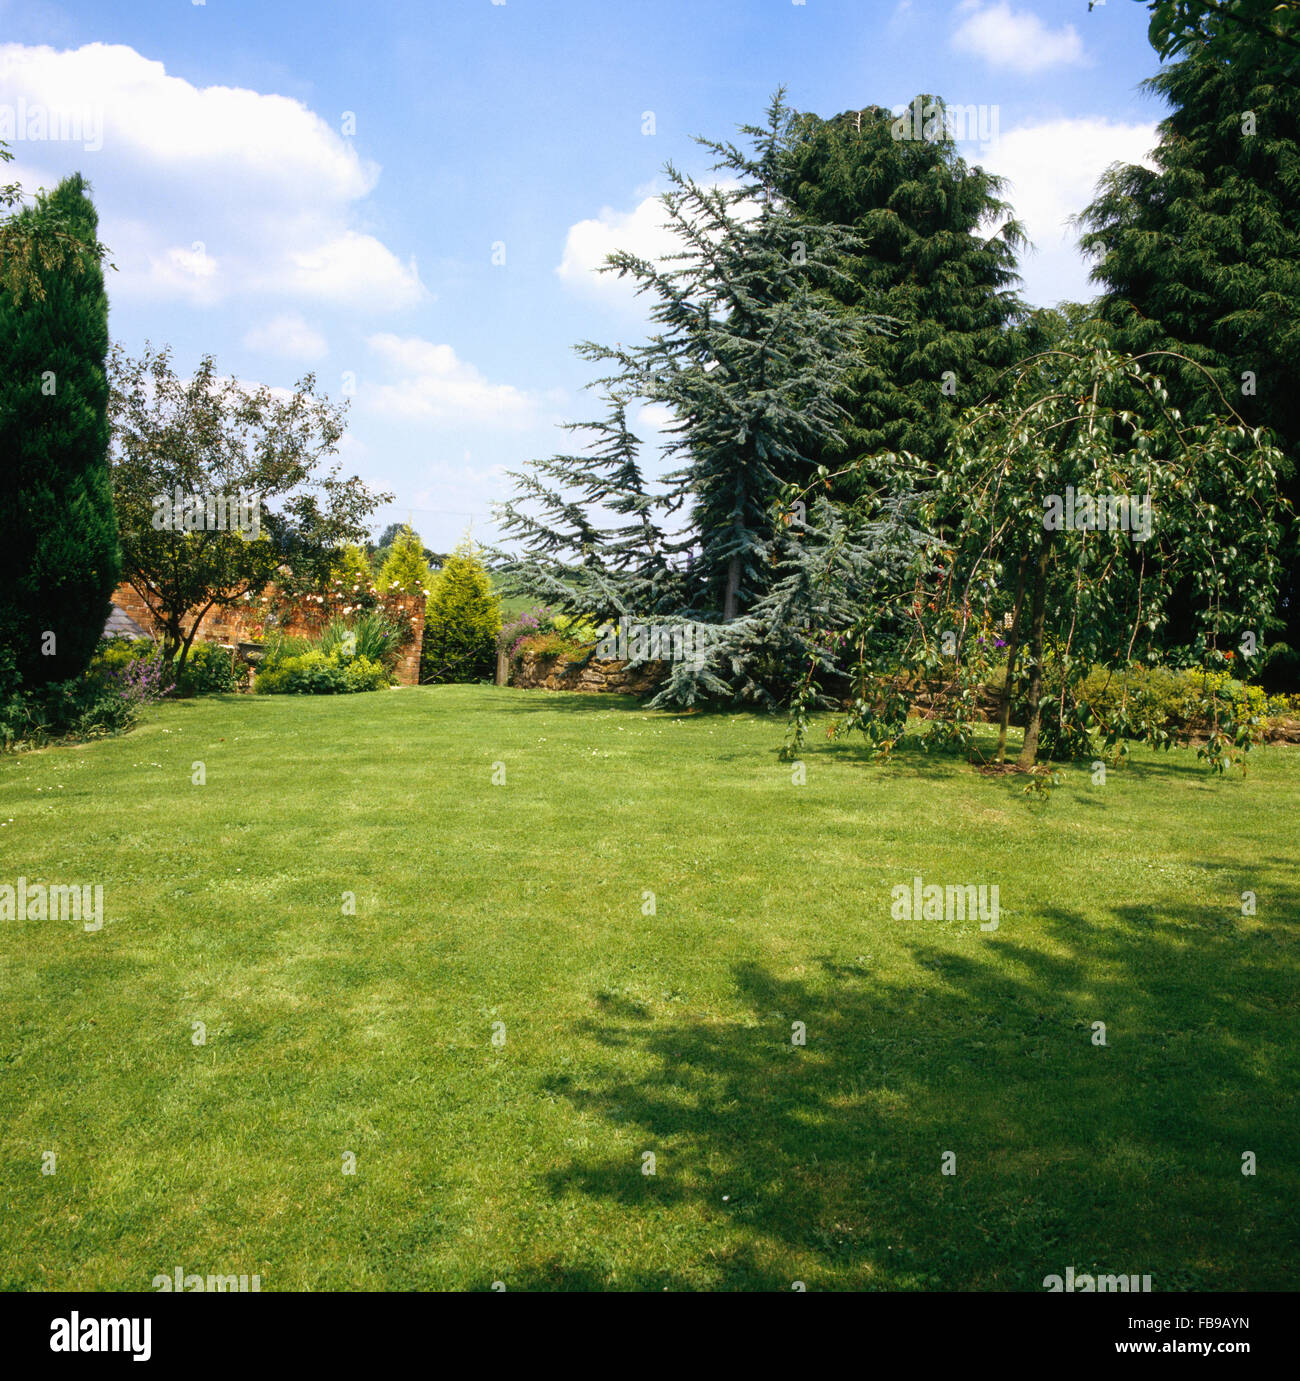 Small weeping pear on lawn in large country garden with spruce and conifers Stock Photo